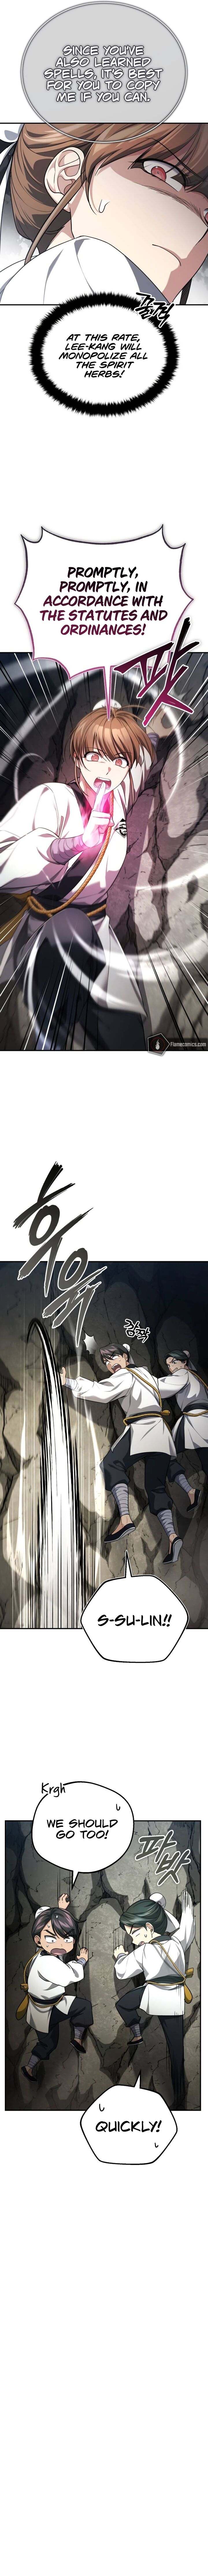 The Terminally Ill Young Master Of The Baek Clan 37 7